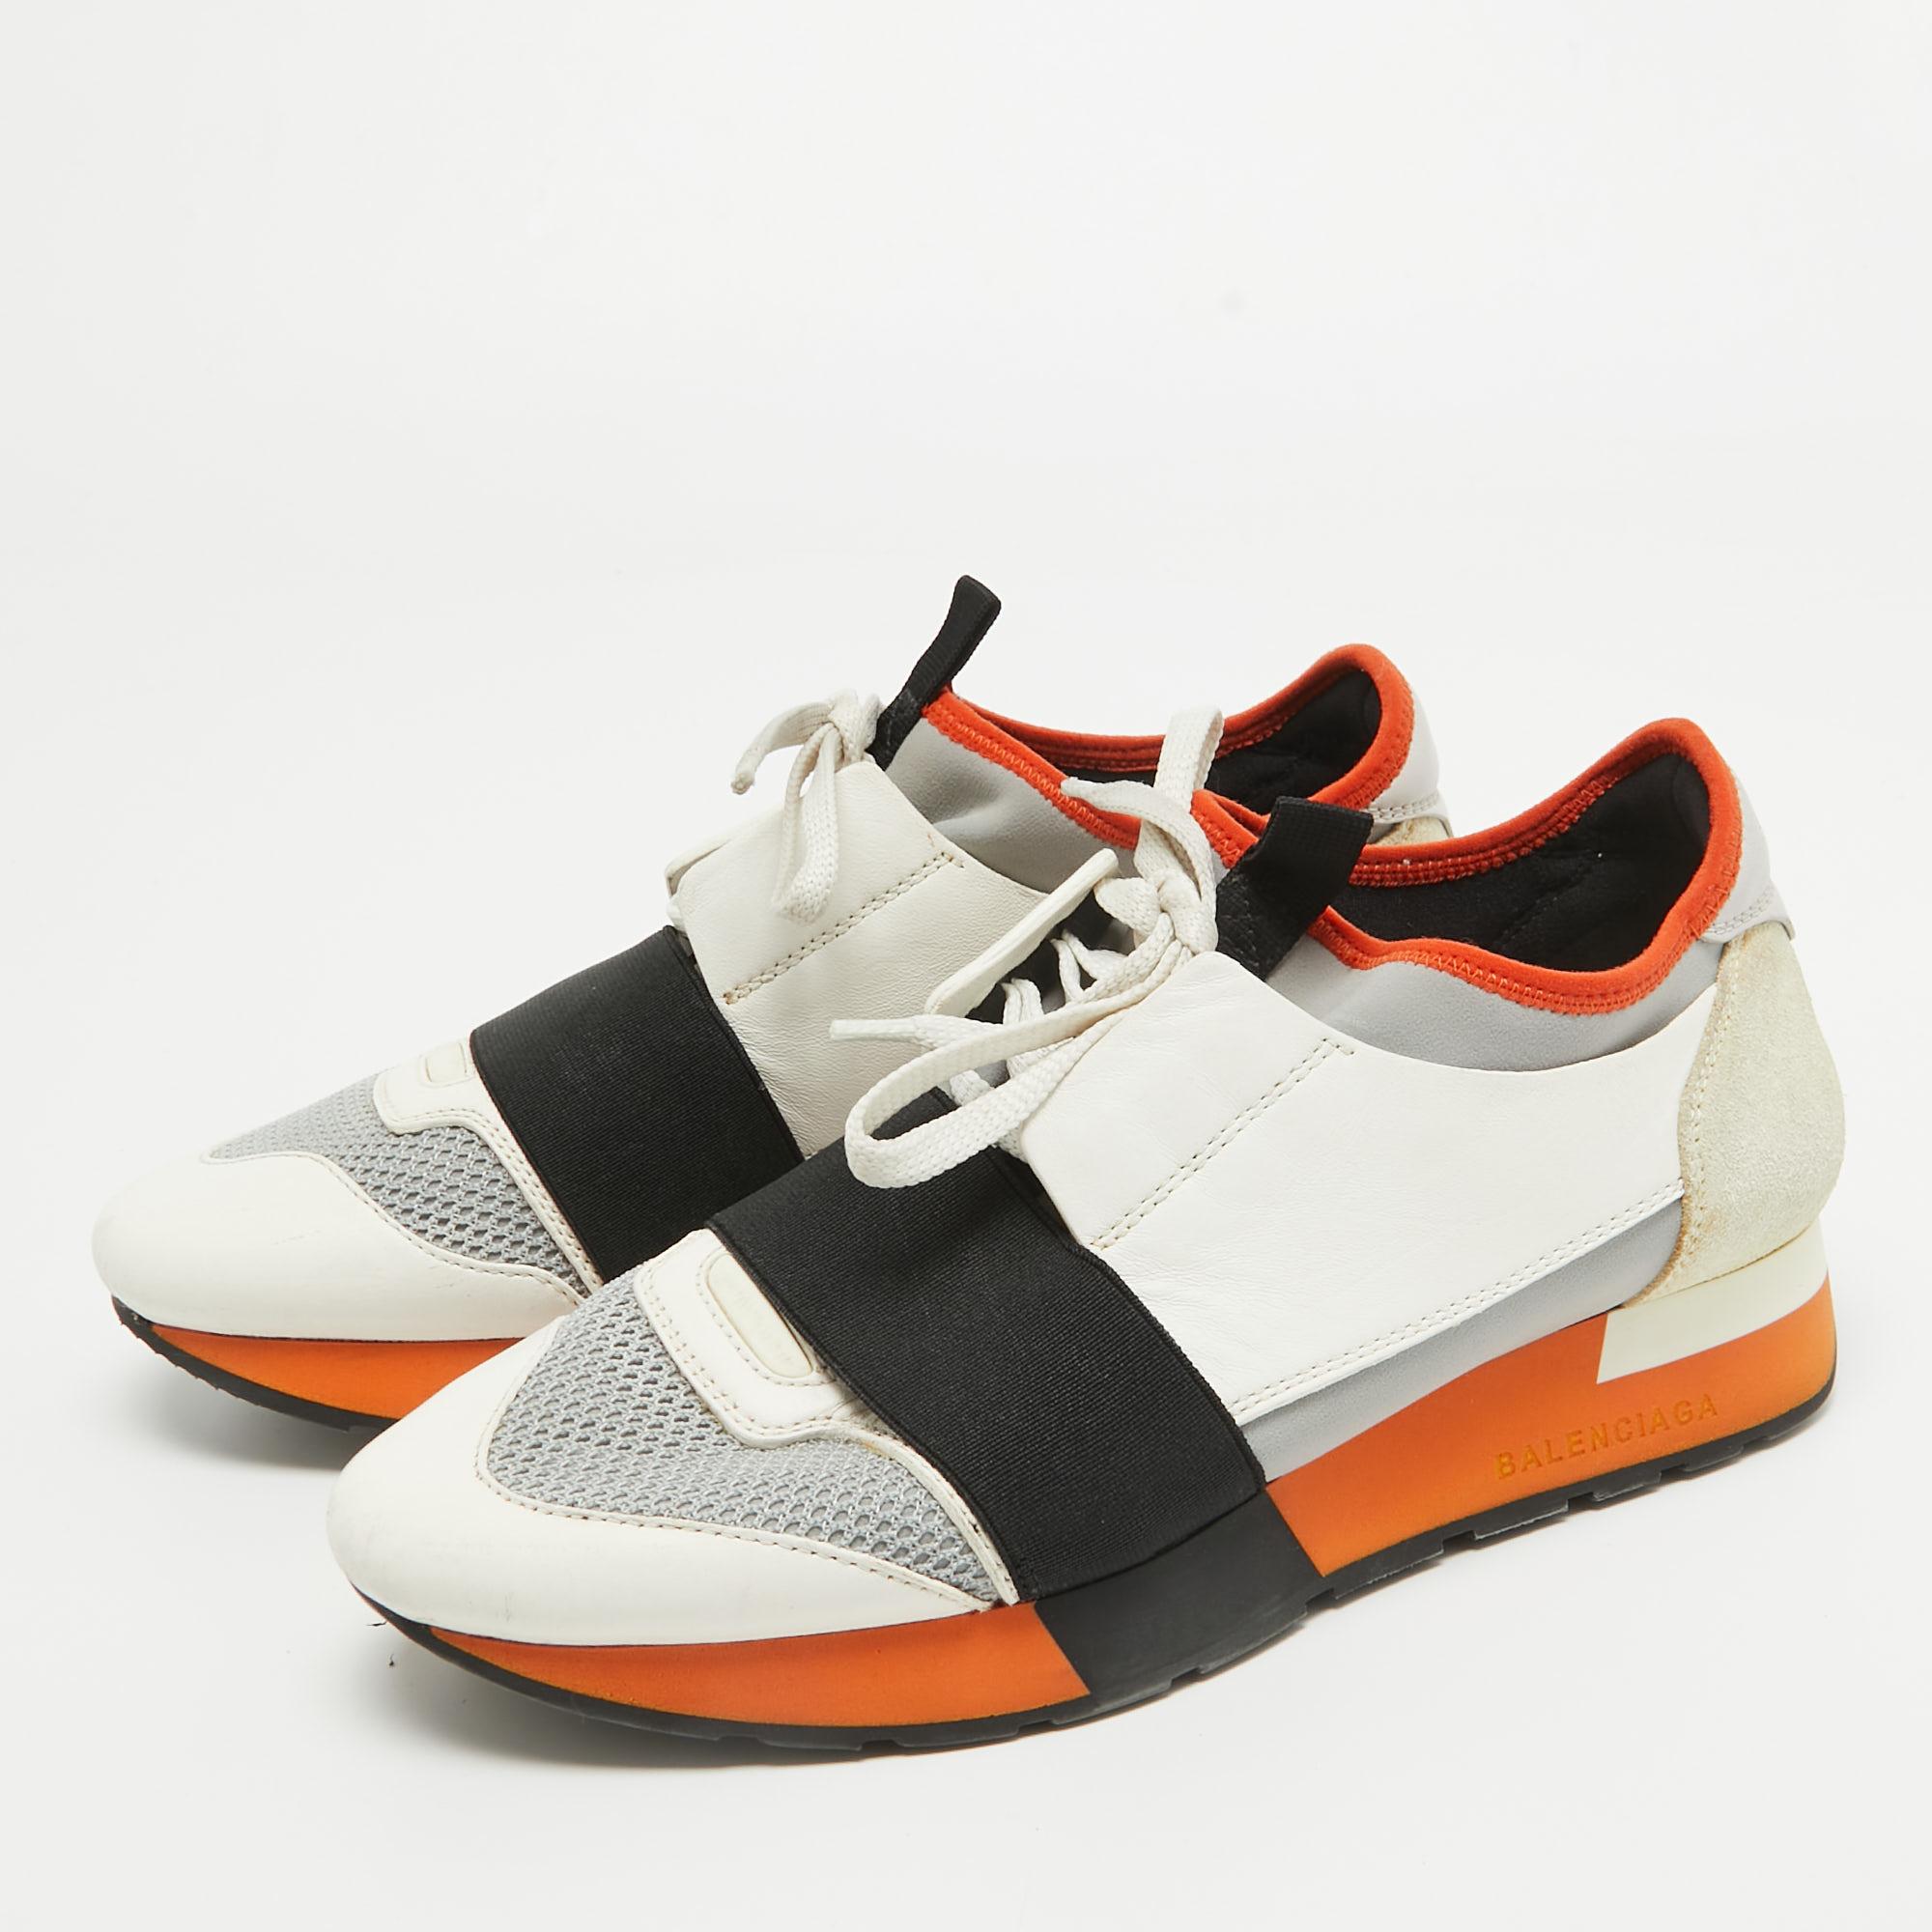 Balenciaga Tricolor Leather and Mesh Race Runner Sneakers Size 37 For Sale 3